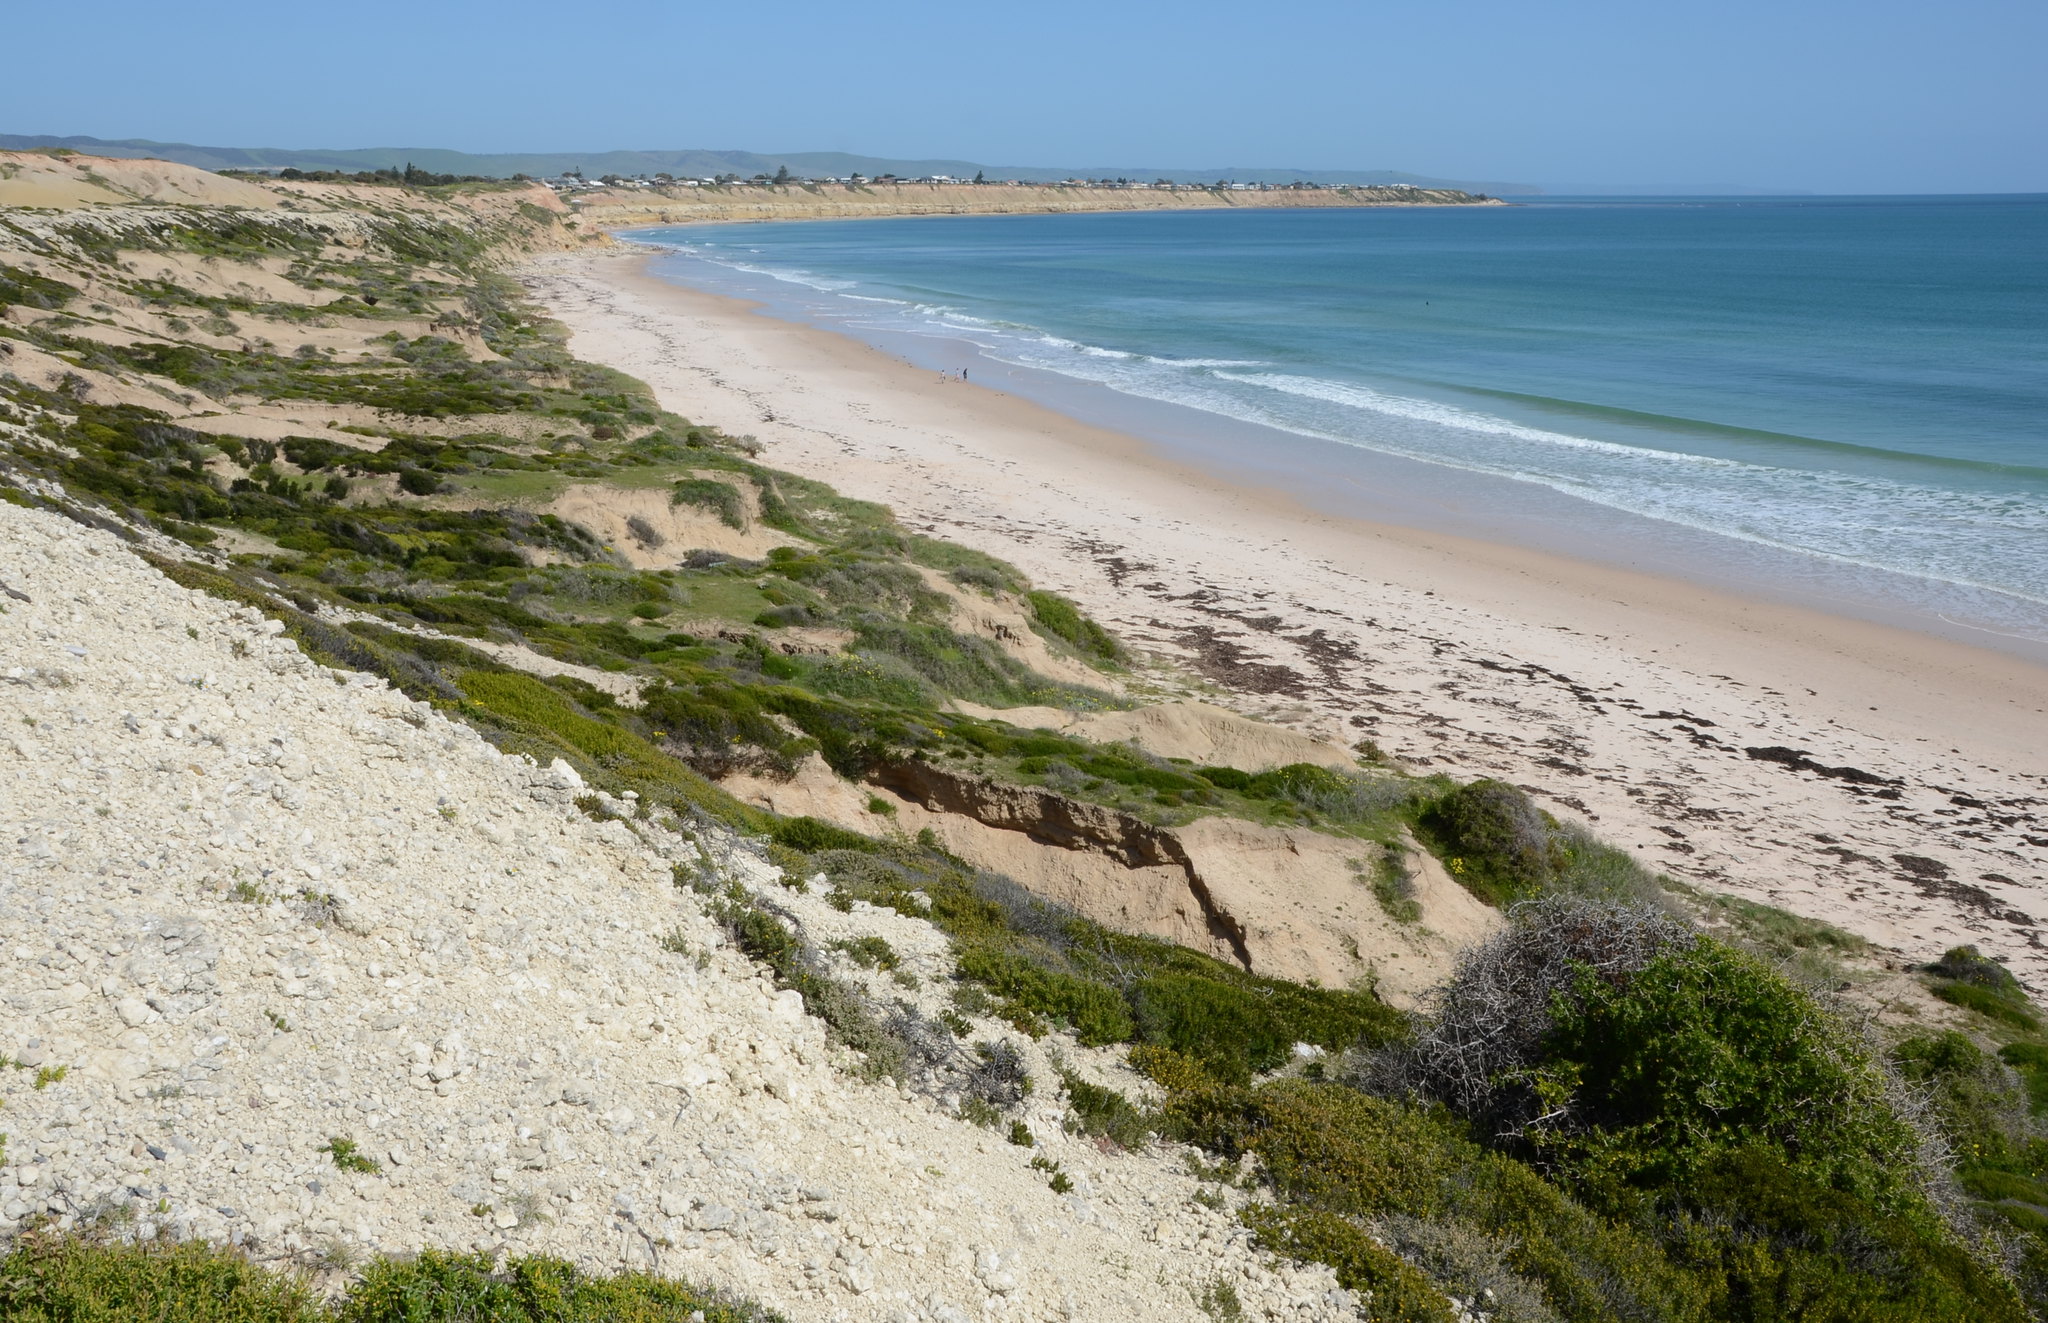 DSC_7735 looking South from Blanche Point, Port Willunga, South Australia